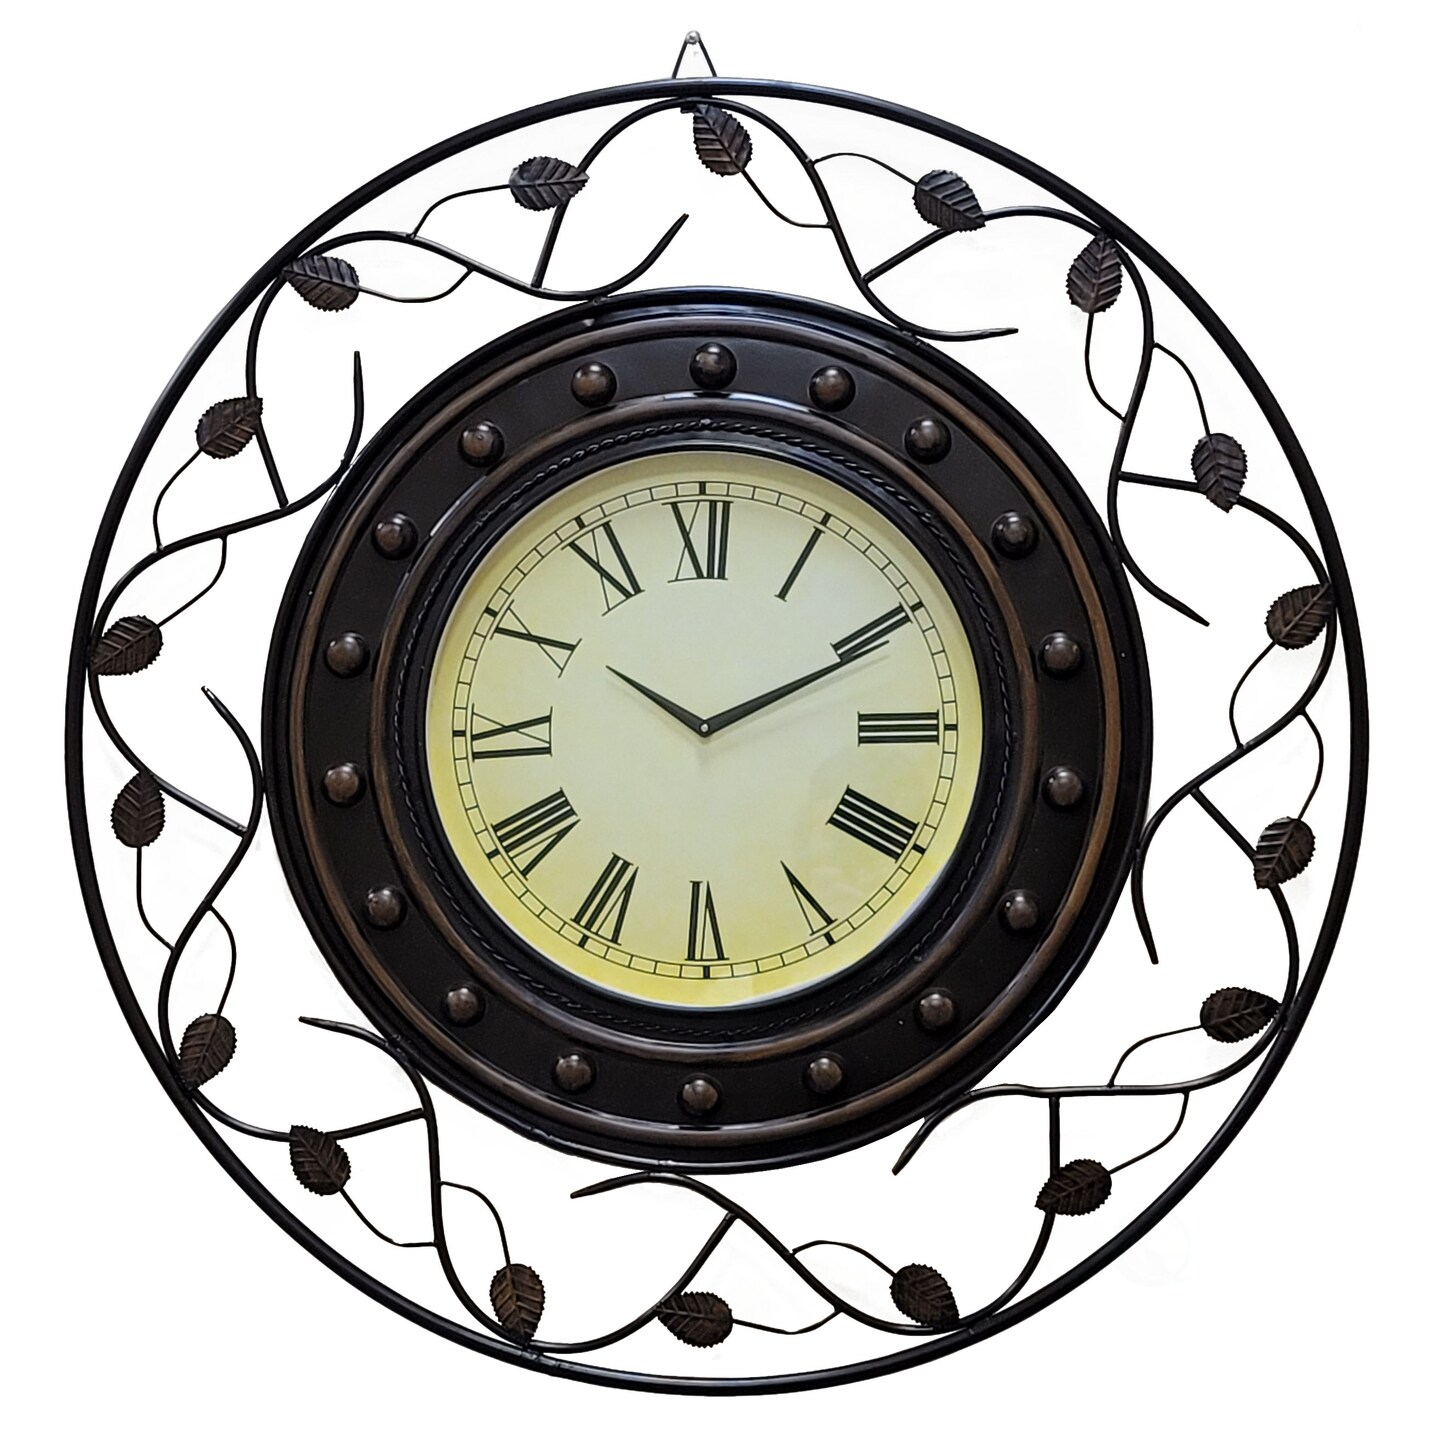 Vintage Roman Numerical 36 in Wall Clock with Elegant Black Metal Leaf Design Frame - for Dining, Living Room, or Kitchen - Antique Style, Large Numbers, Unique Wall Art, Traditional Clock